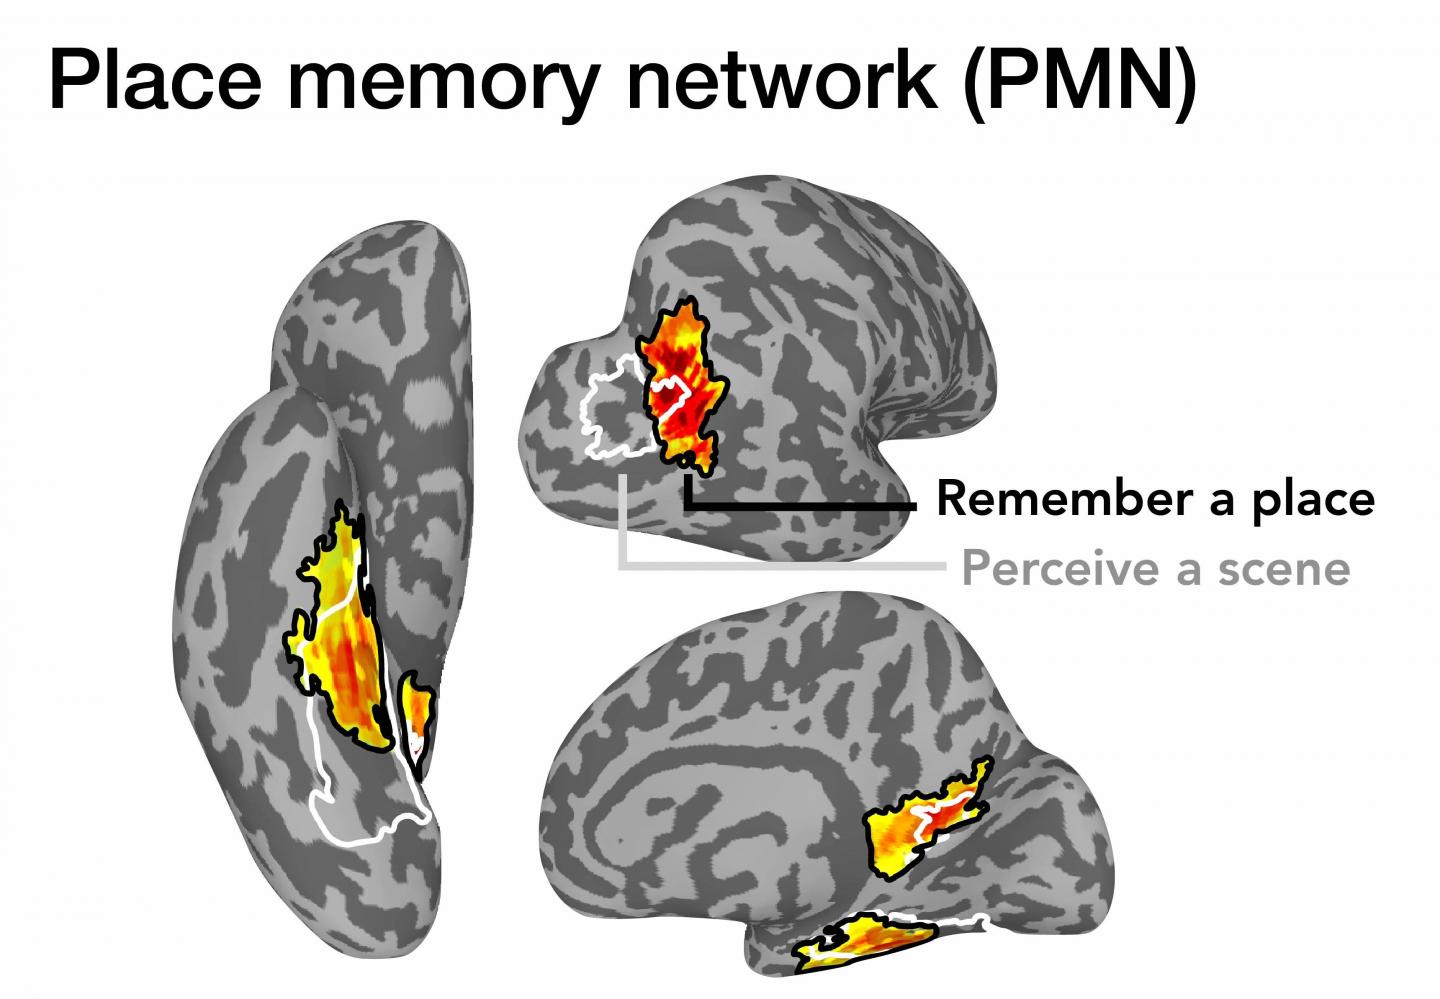 Place-memory network of the human brain